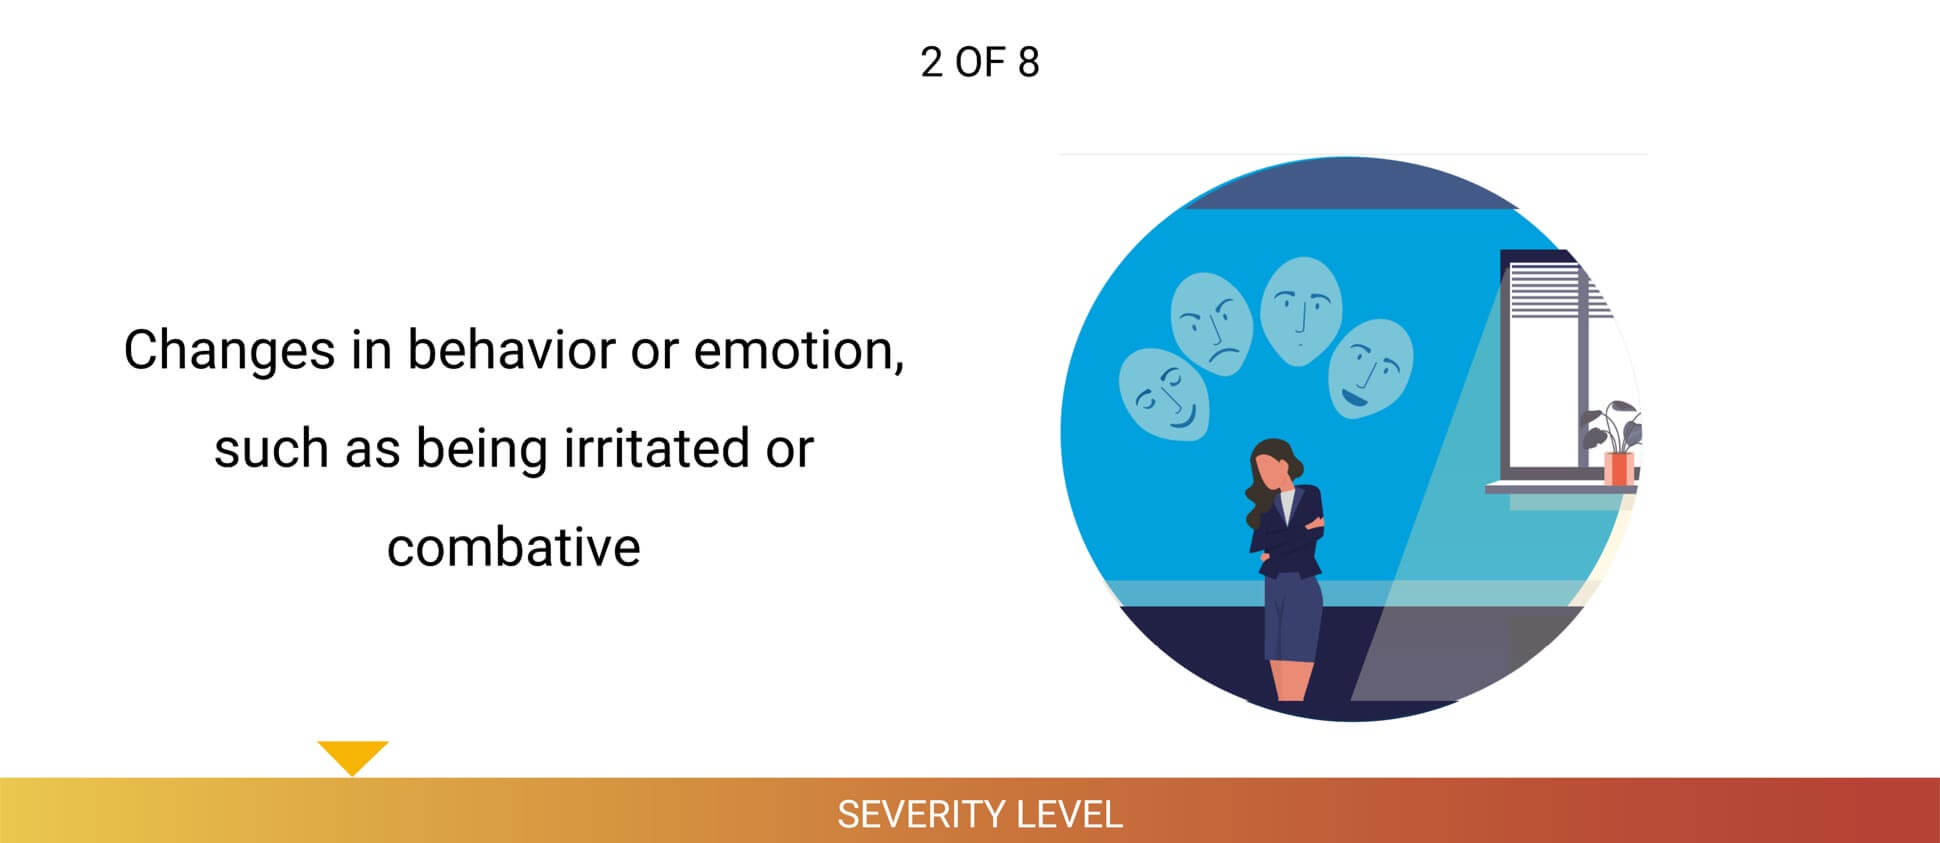 Changes in behavior or emotion, such as being irritated or combative